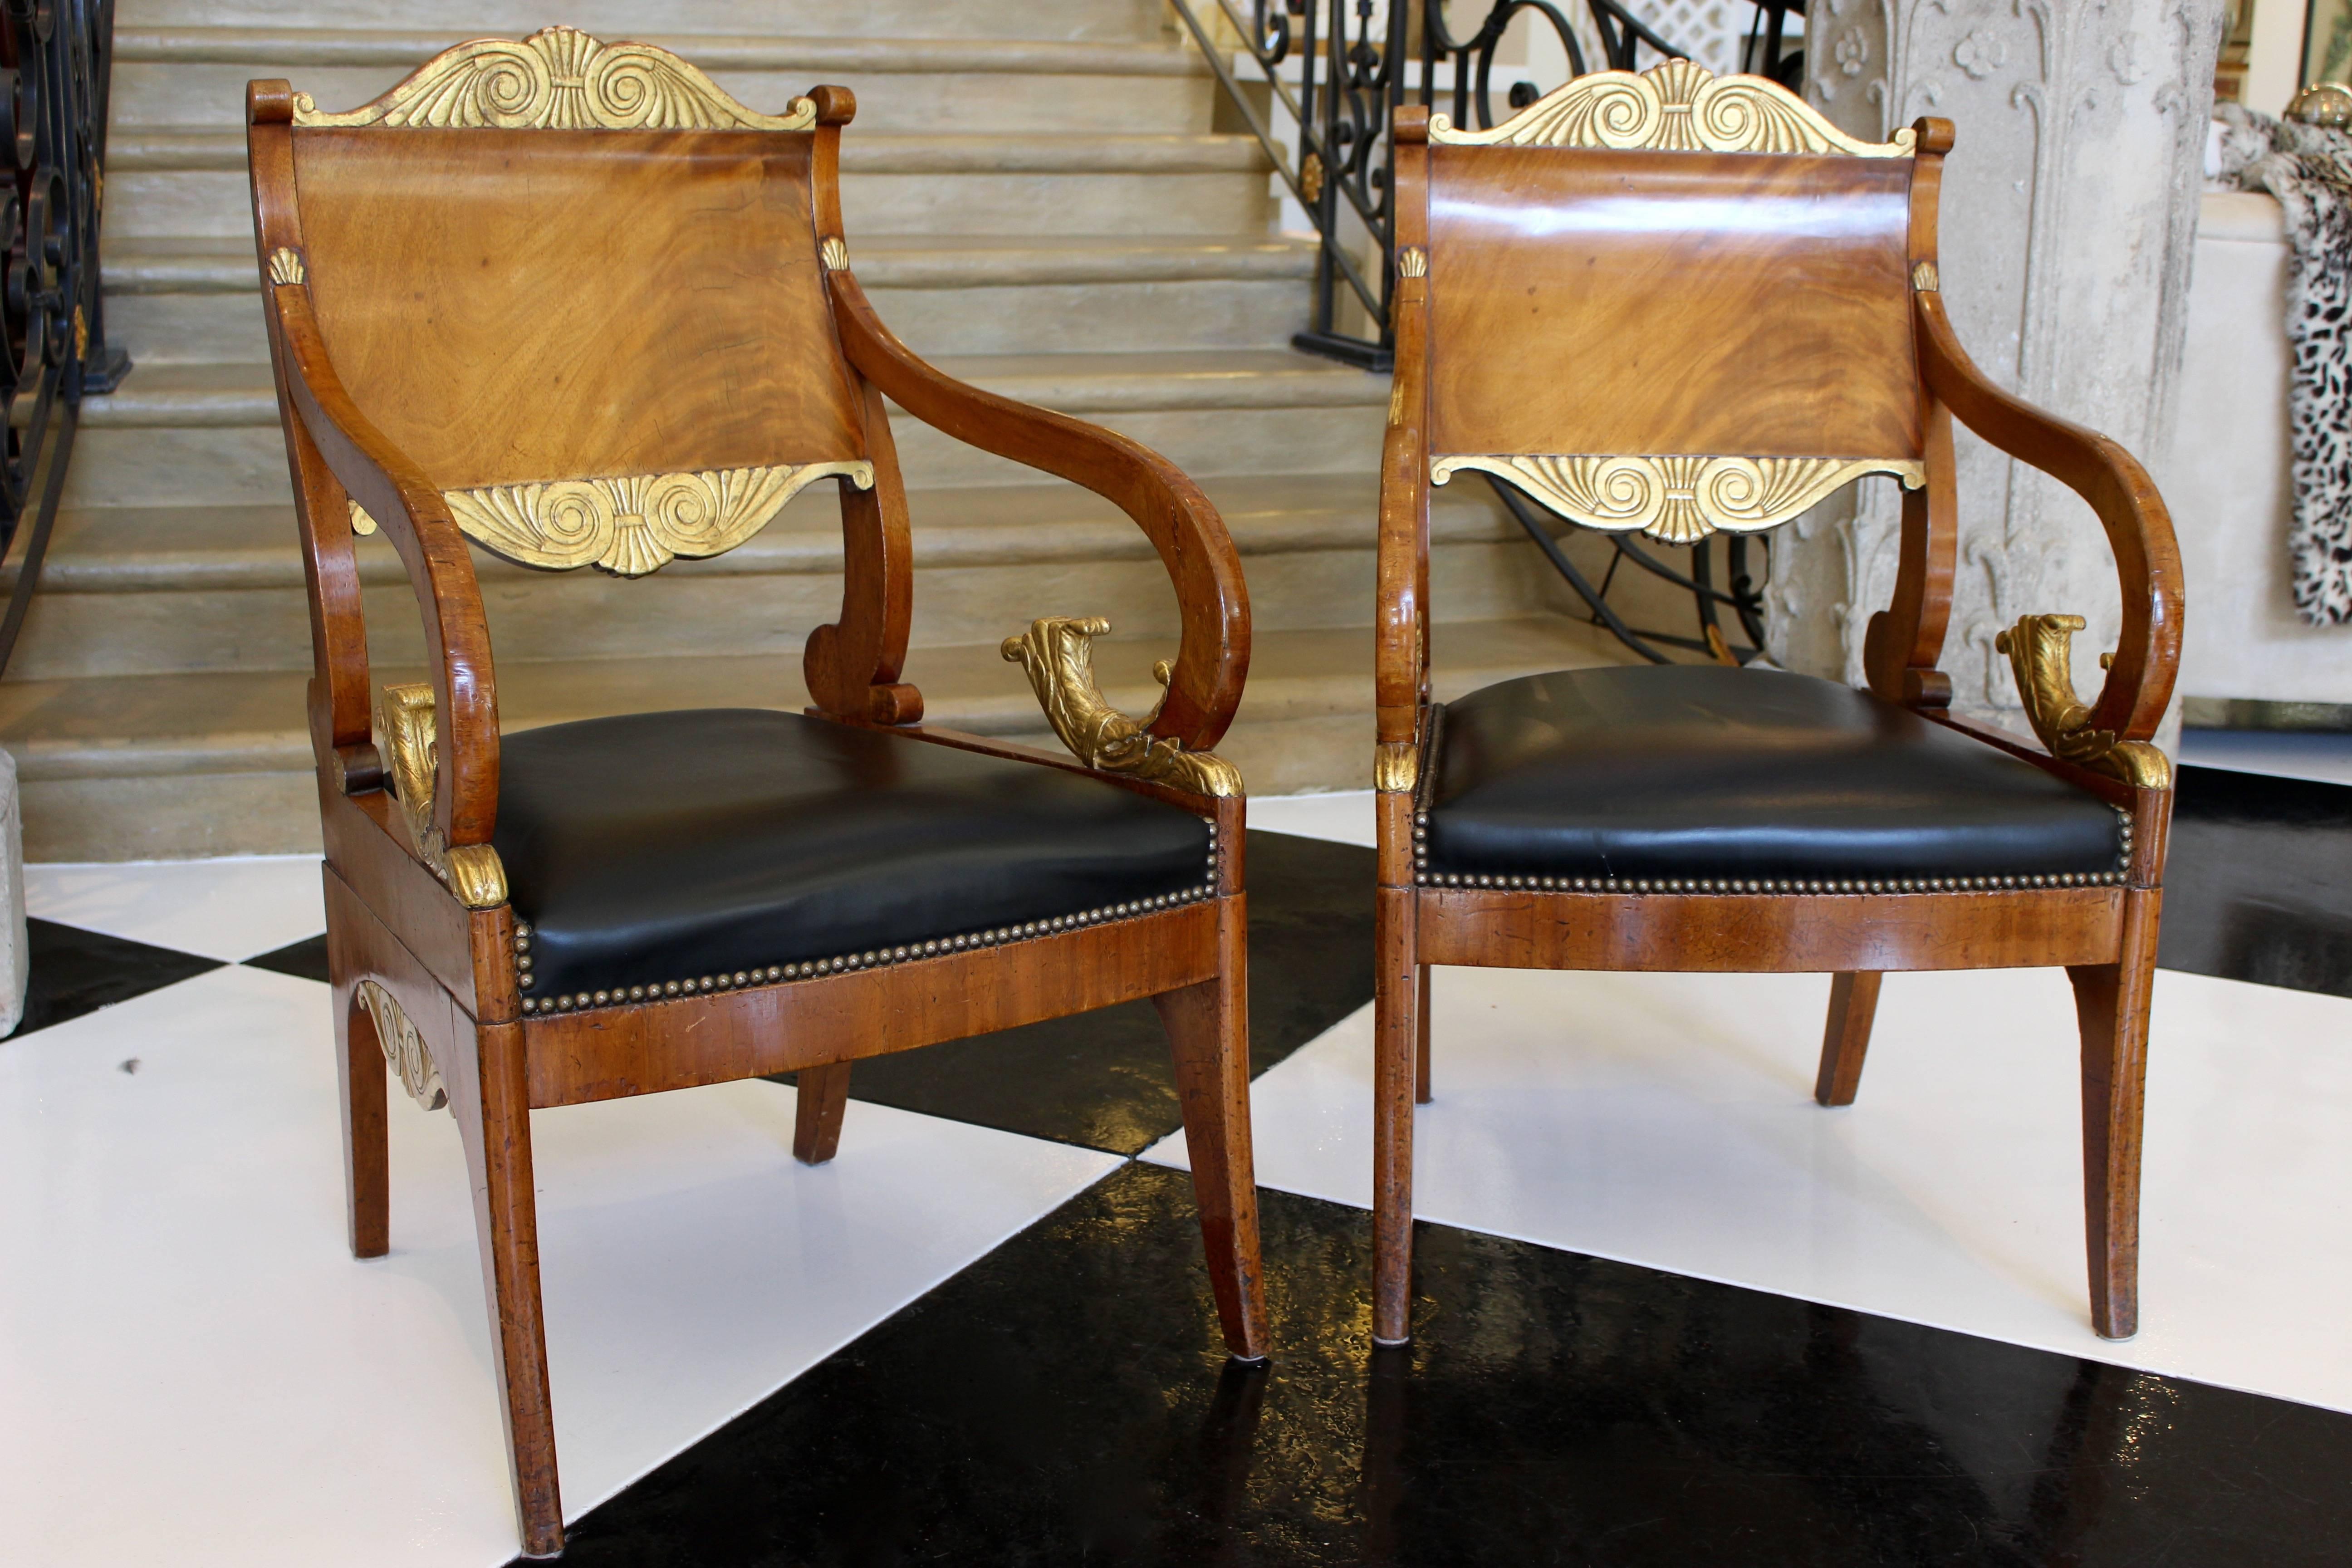 Pair of 18th Century Russian Neoclassical Period Mahogany Parcel-Gilt Armchairs For Sale 2